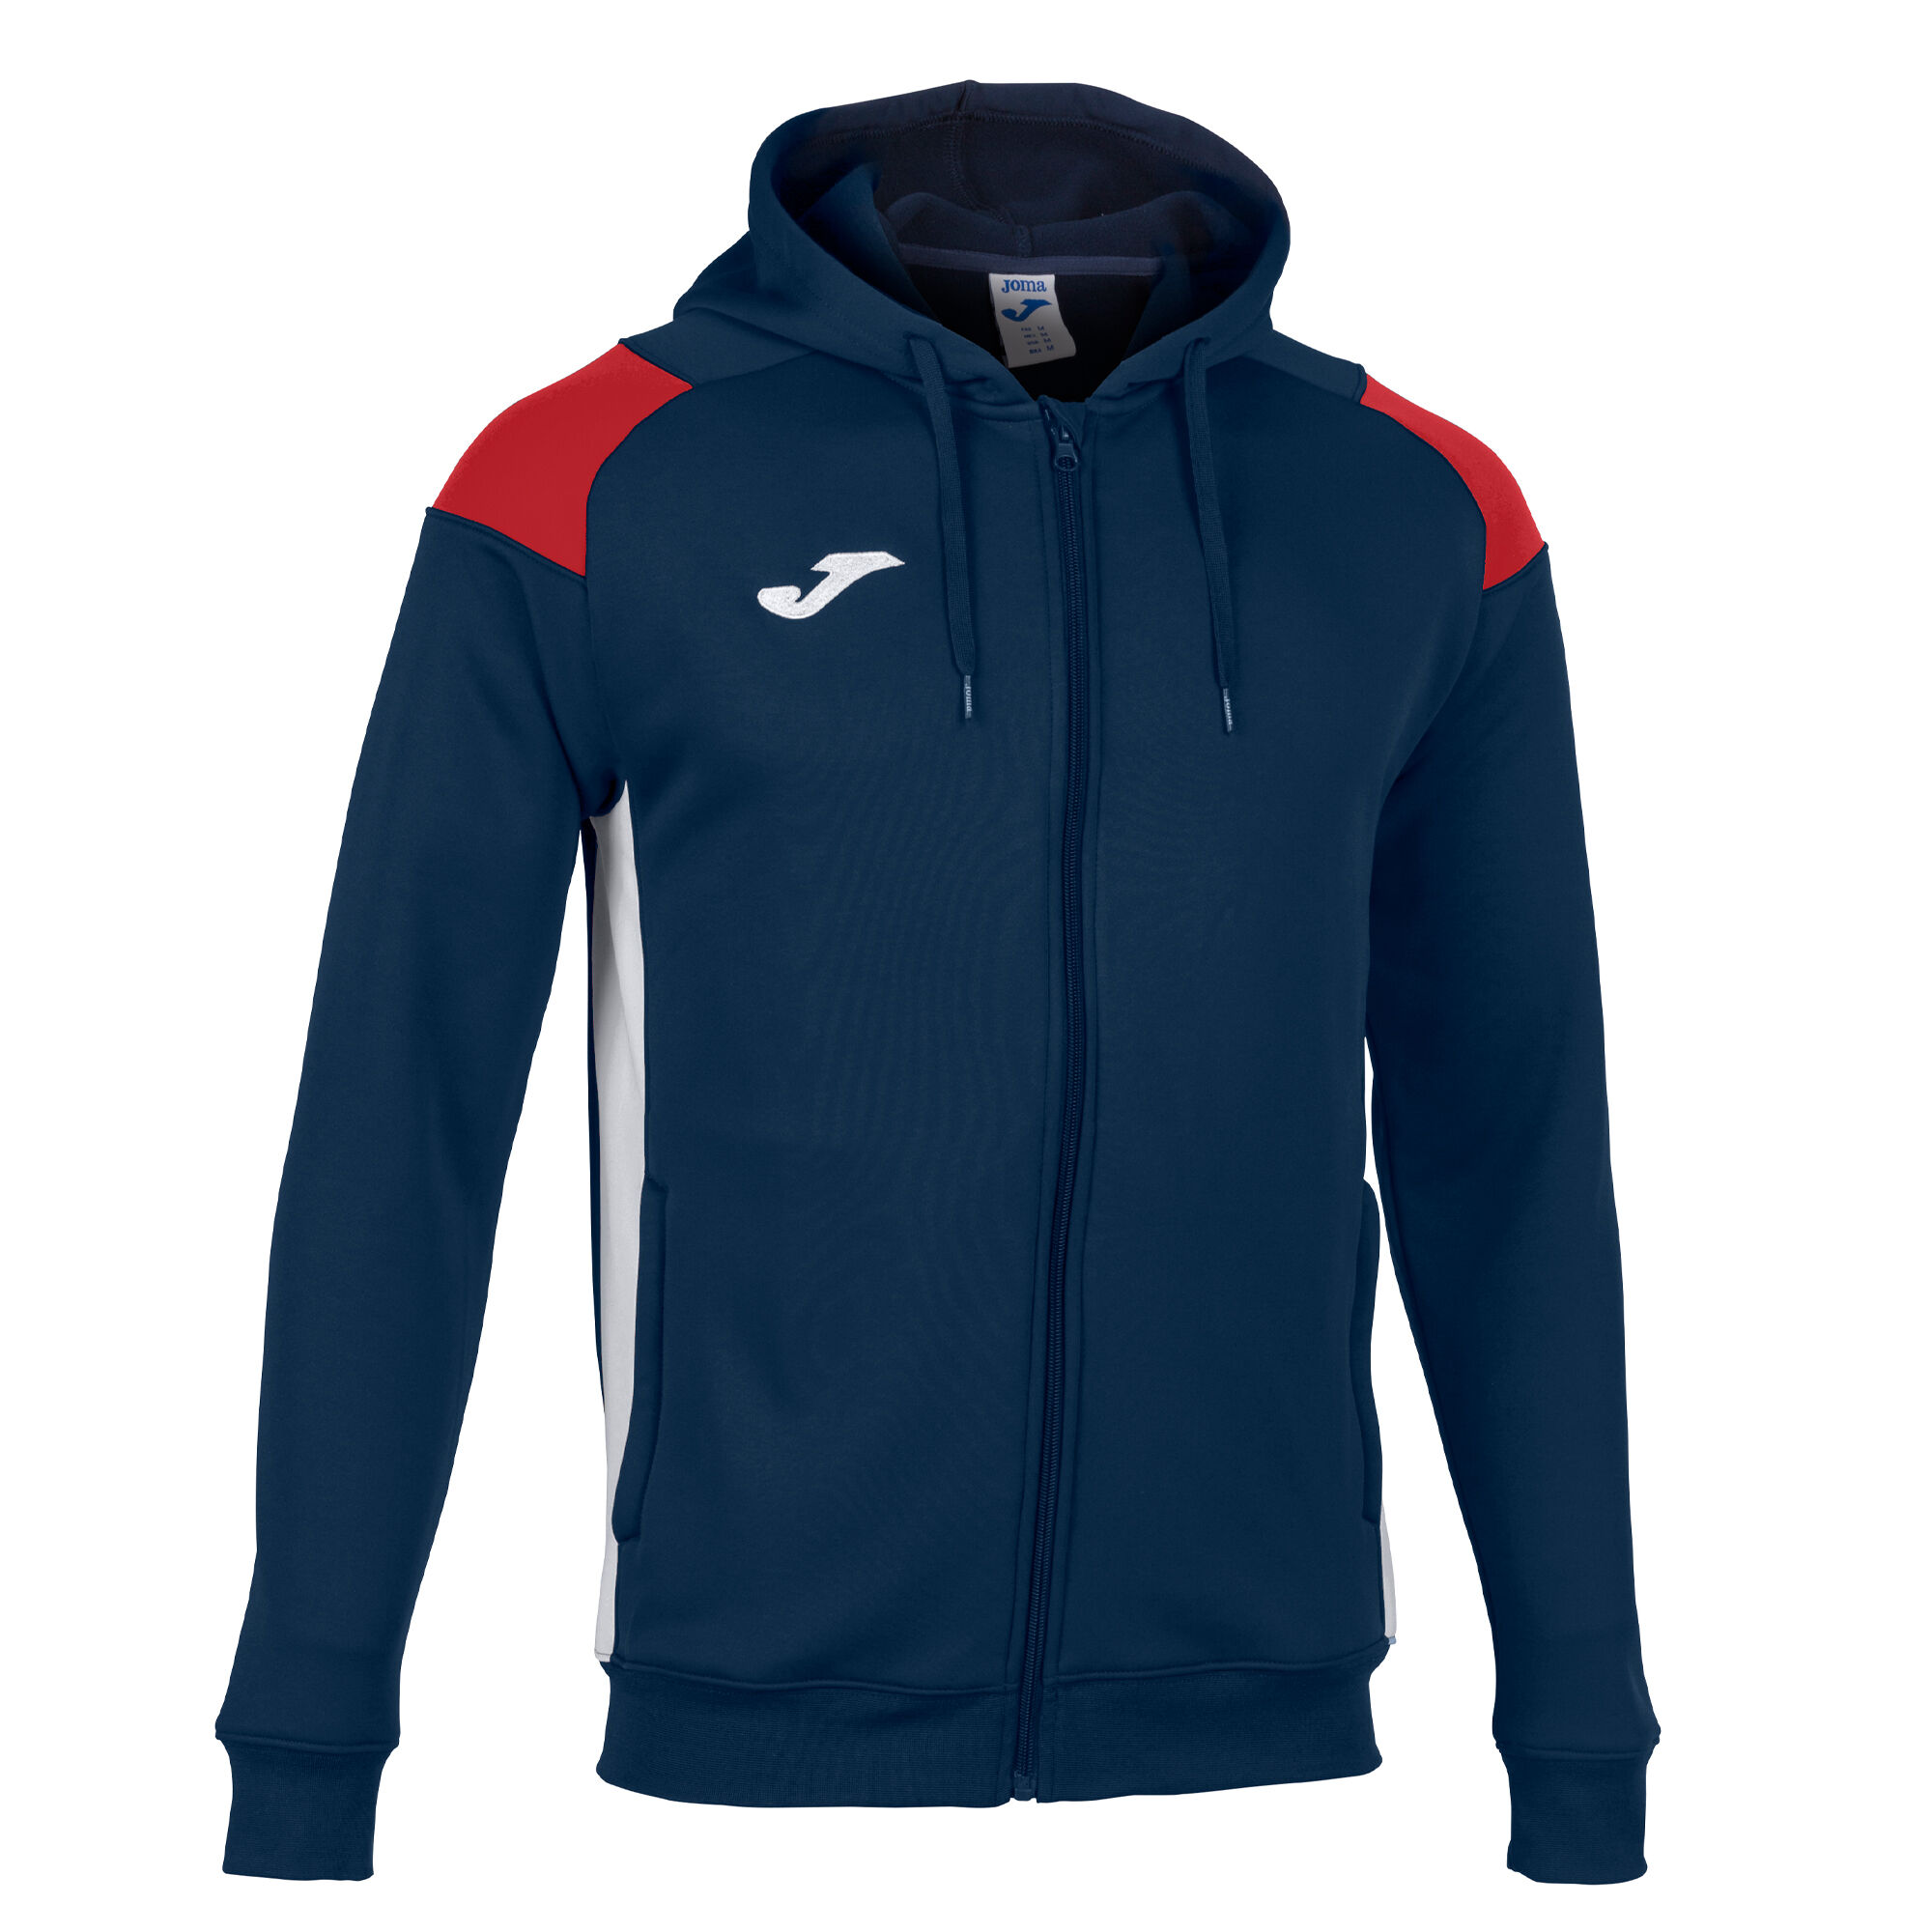 HOODED JACKET MAN CREW III NAVY BLUE RED WHITE